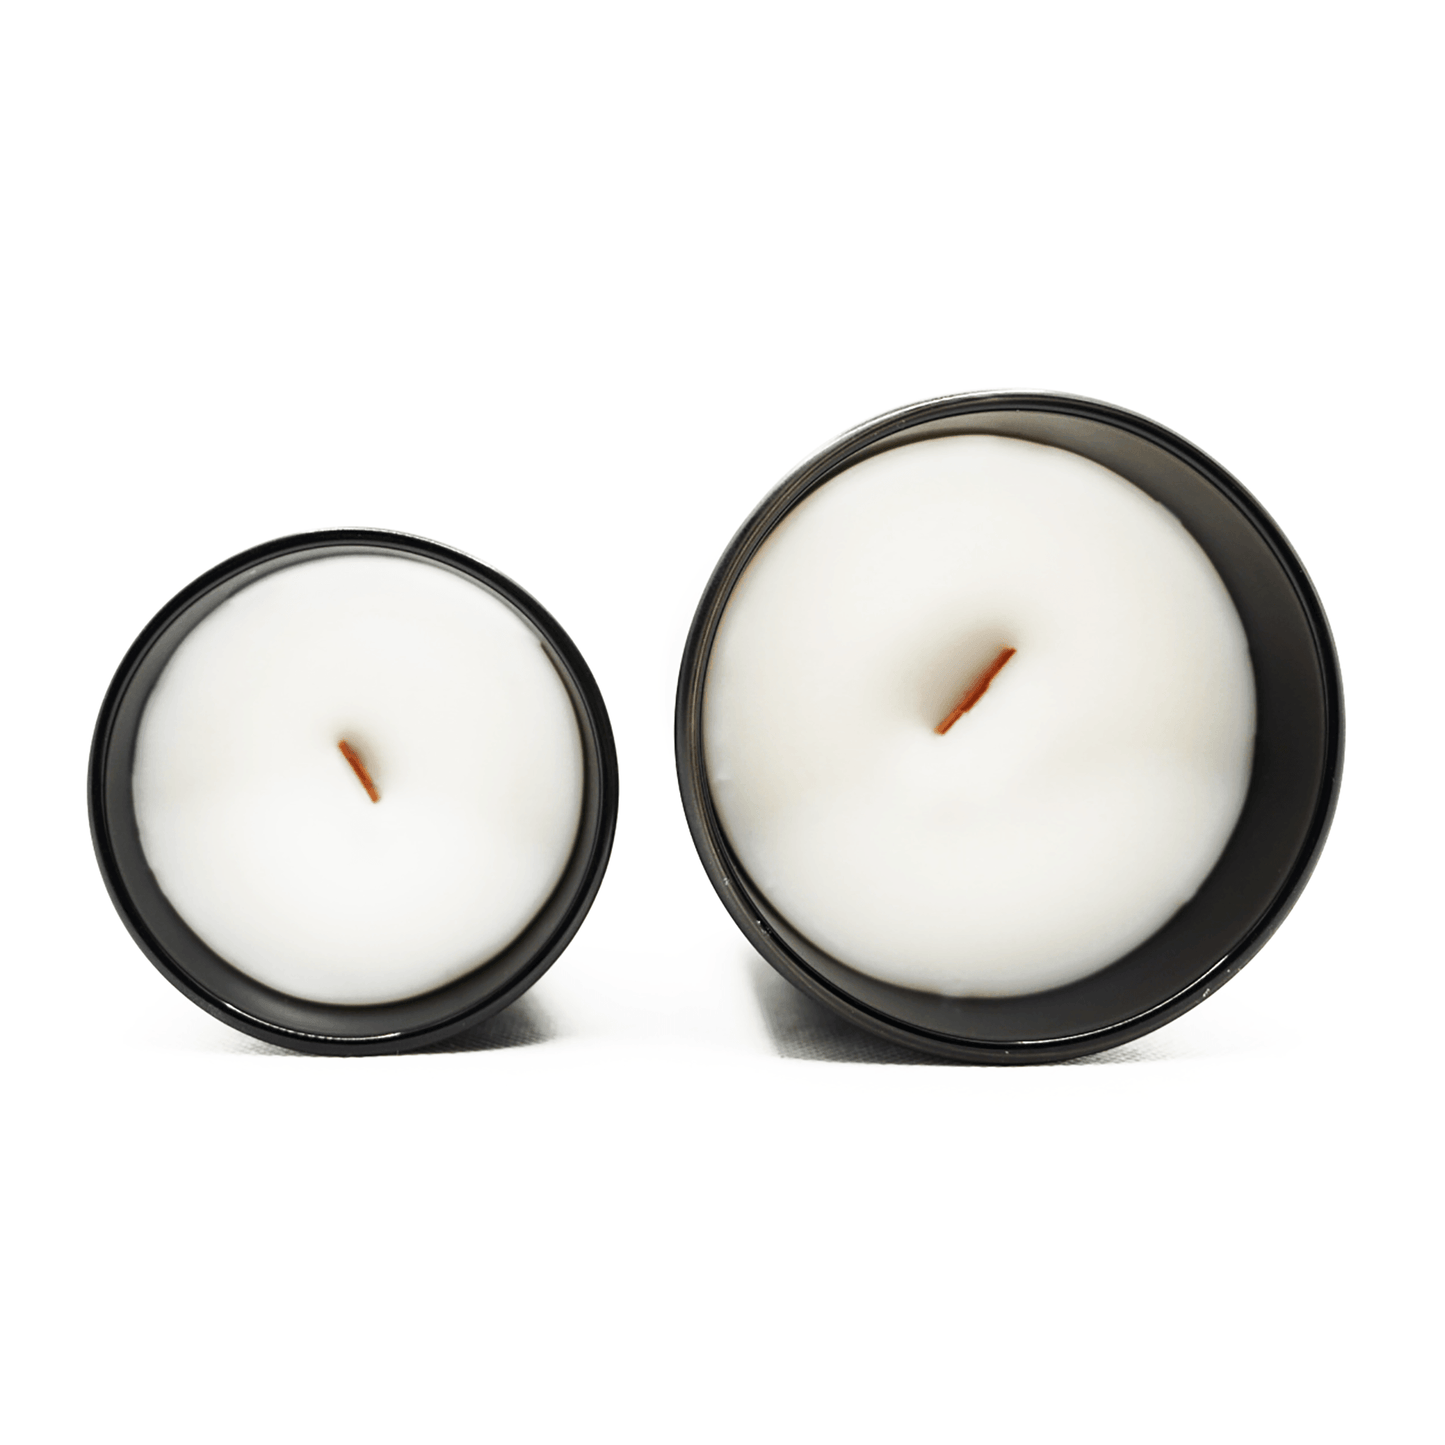 Vanilla Loaf + Peppermint | Woodwick Candle - BADWAX